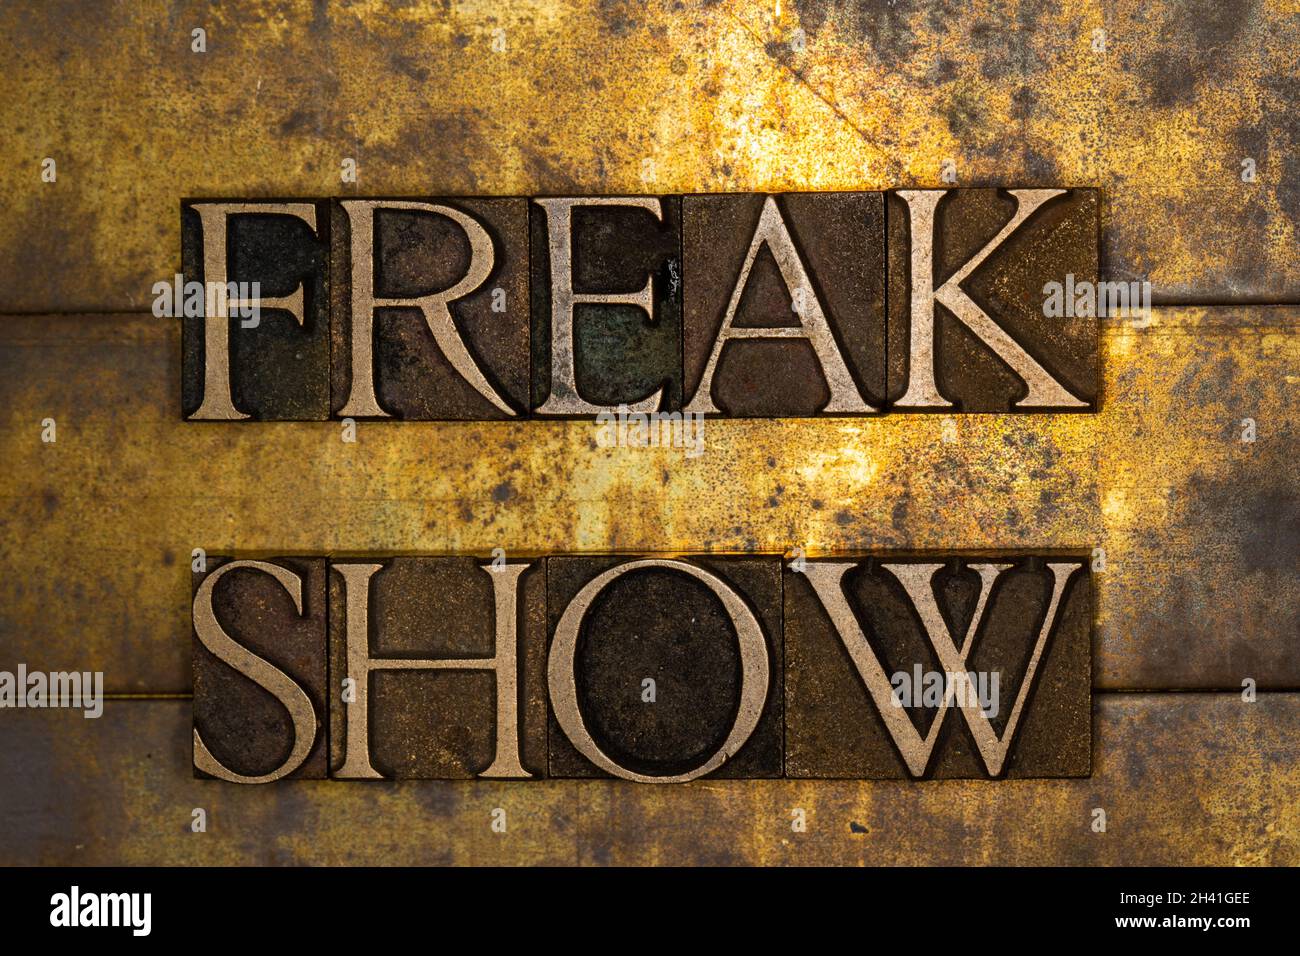 Freak Show text message on textured grunge copper and vintage gold background Stock Photo